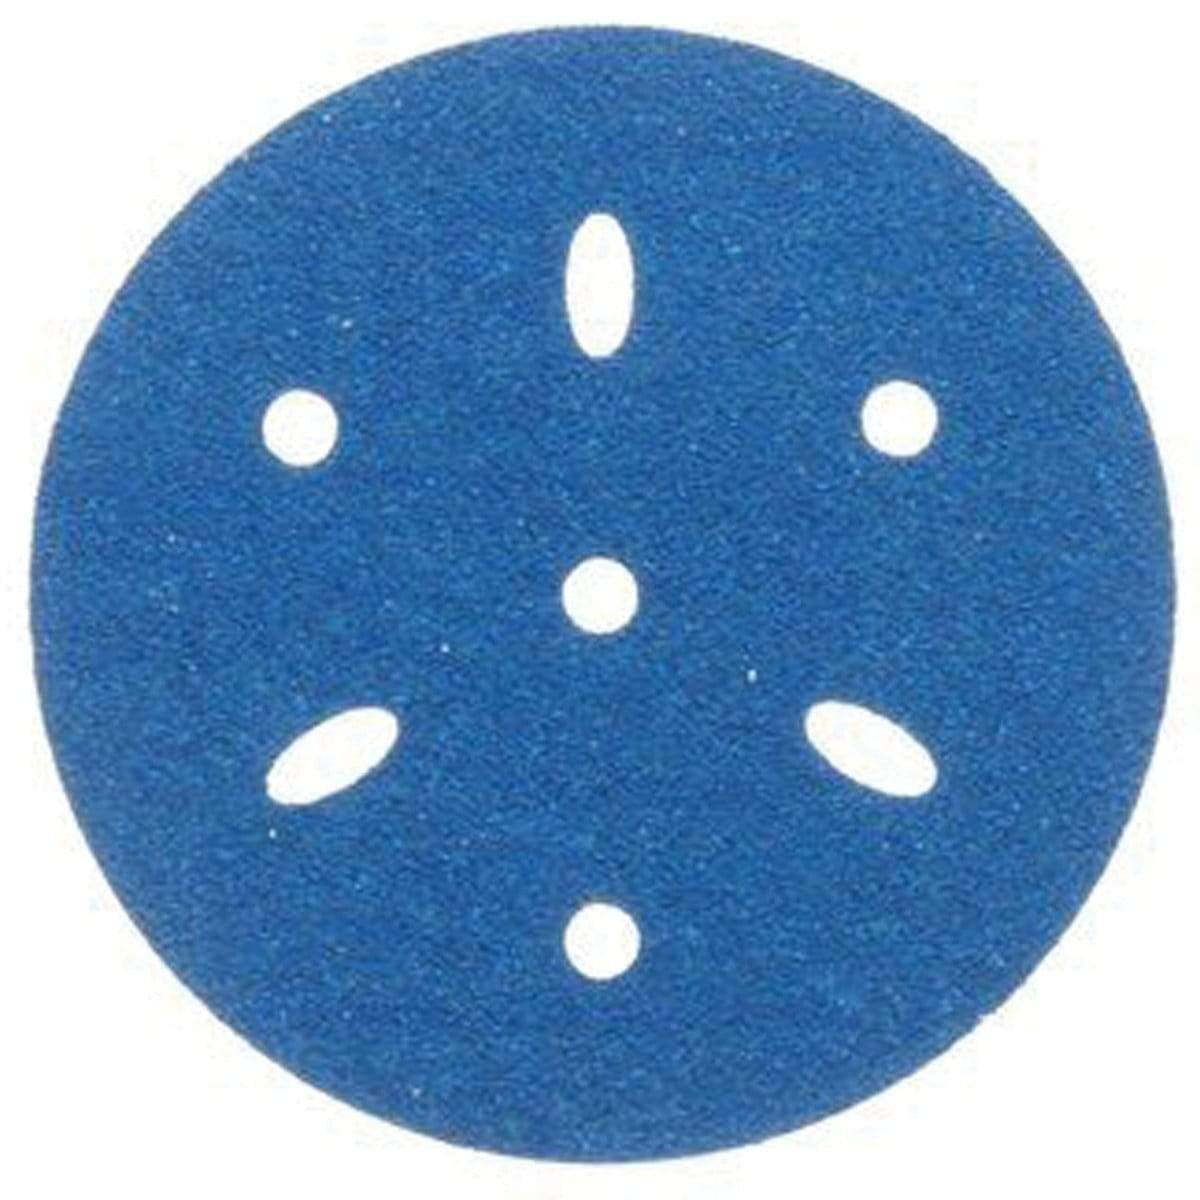 3M Marine Qualifies for Free Shipping 3M Hookit Blue Sandpaper 5" Disc 320 Multi-Hole 50/Bx #36165